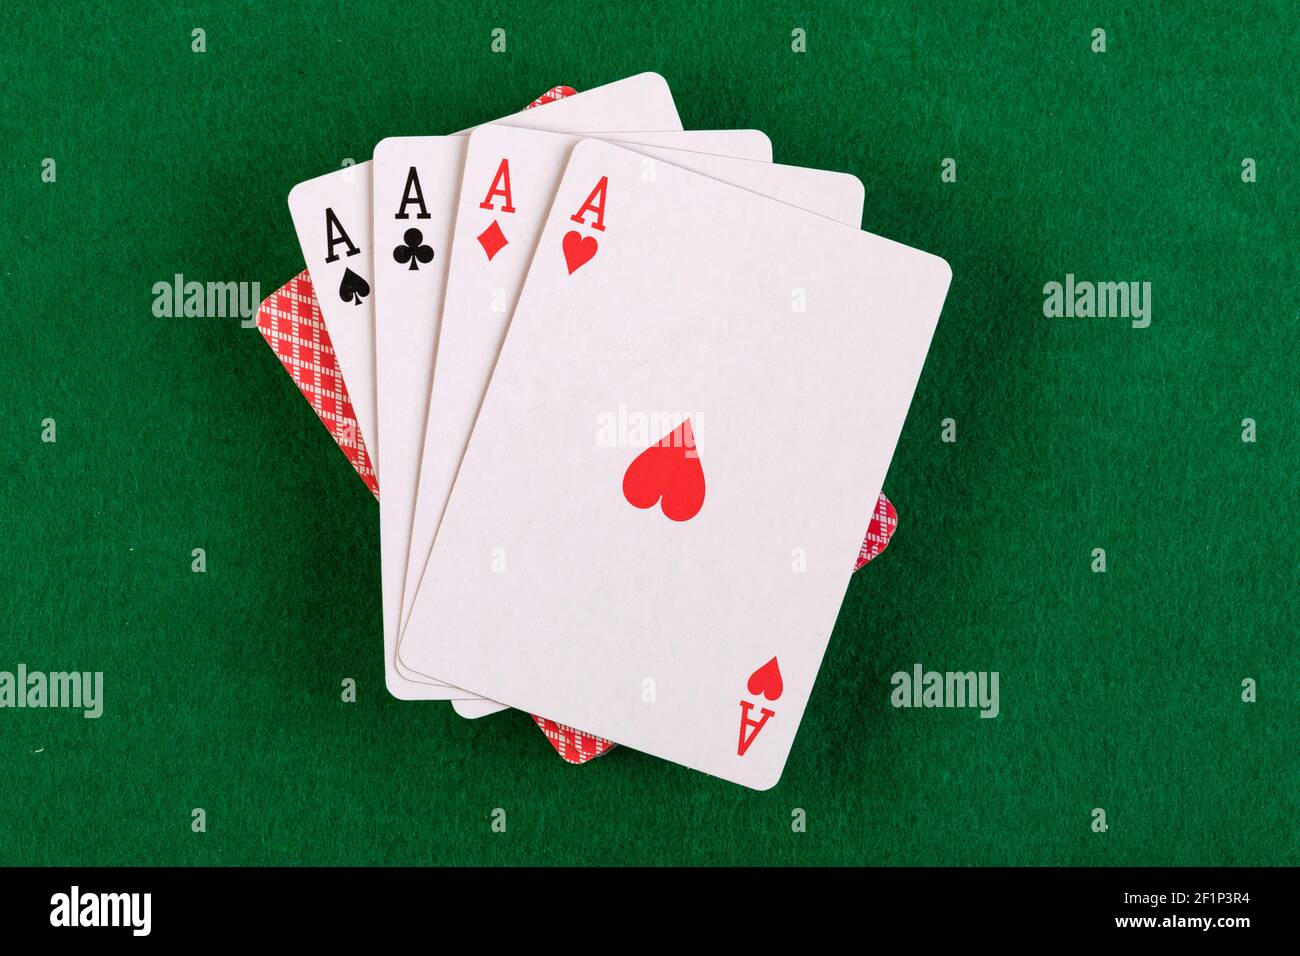 Playing cards Stock Photo